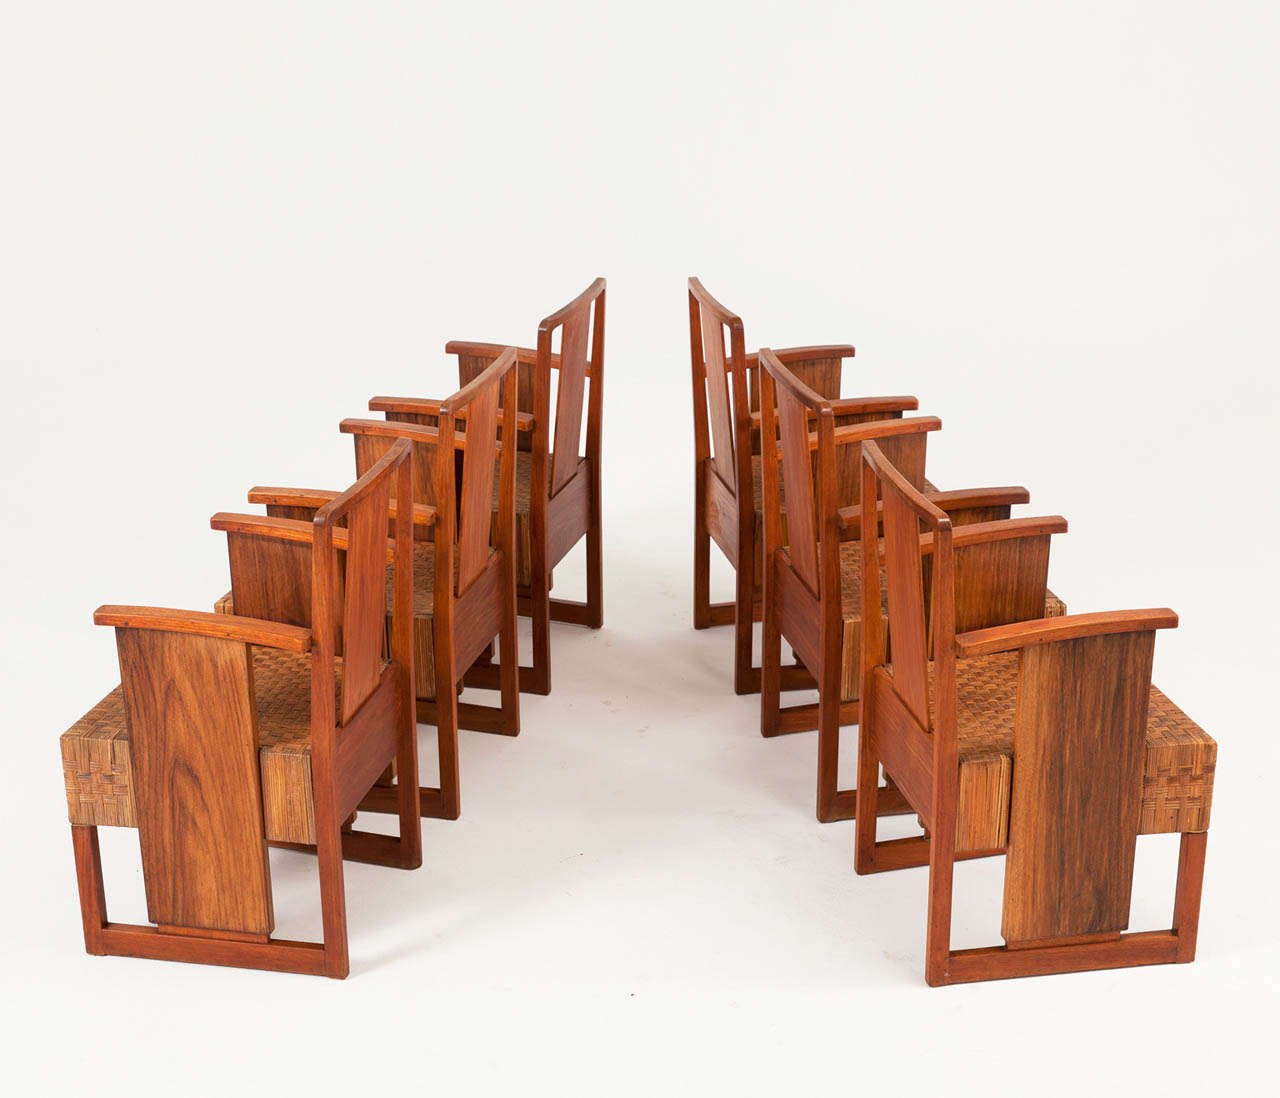 Interesting set of 6 Art Deco armchairs with solid wooden frame and cubistic shaped seats with woven cane upholstery.

The seats have been woven in an interesting pattern.

The wooden surface has been restored and the construction is completely